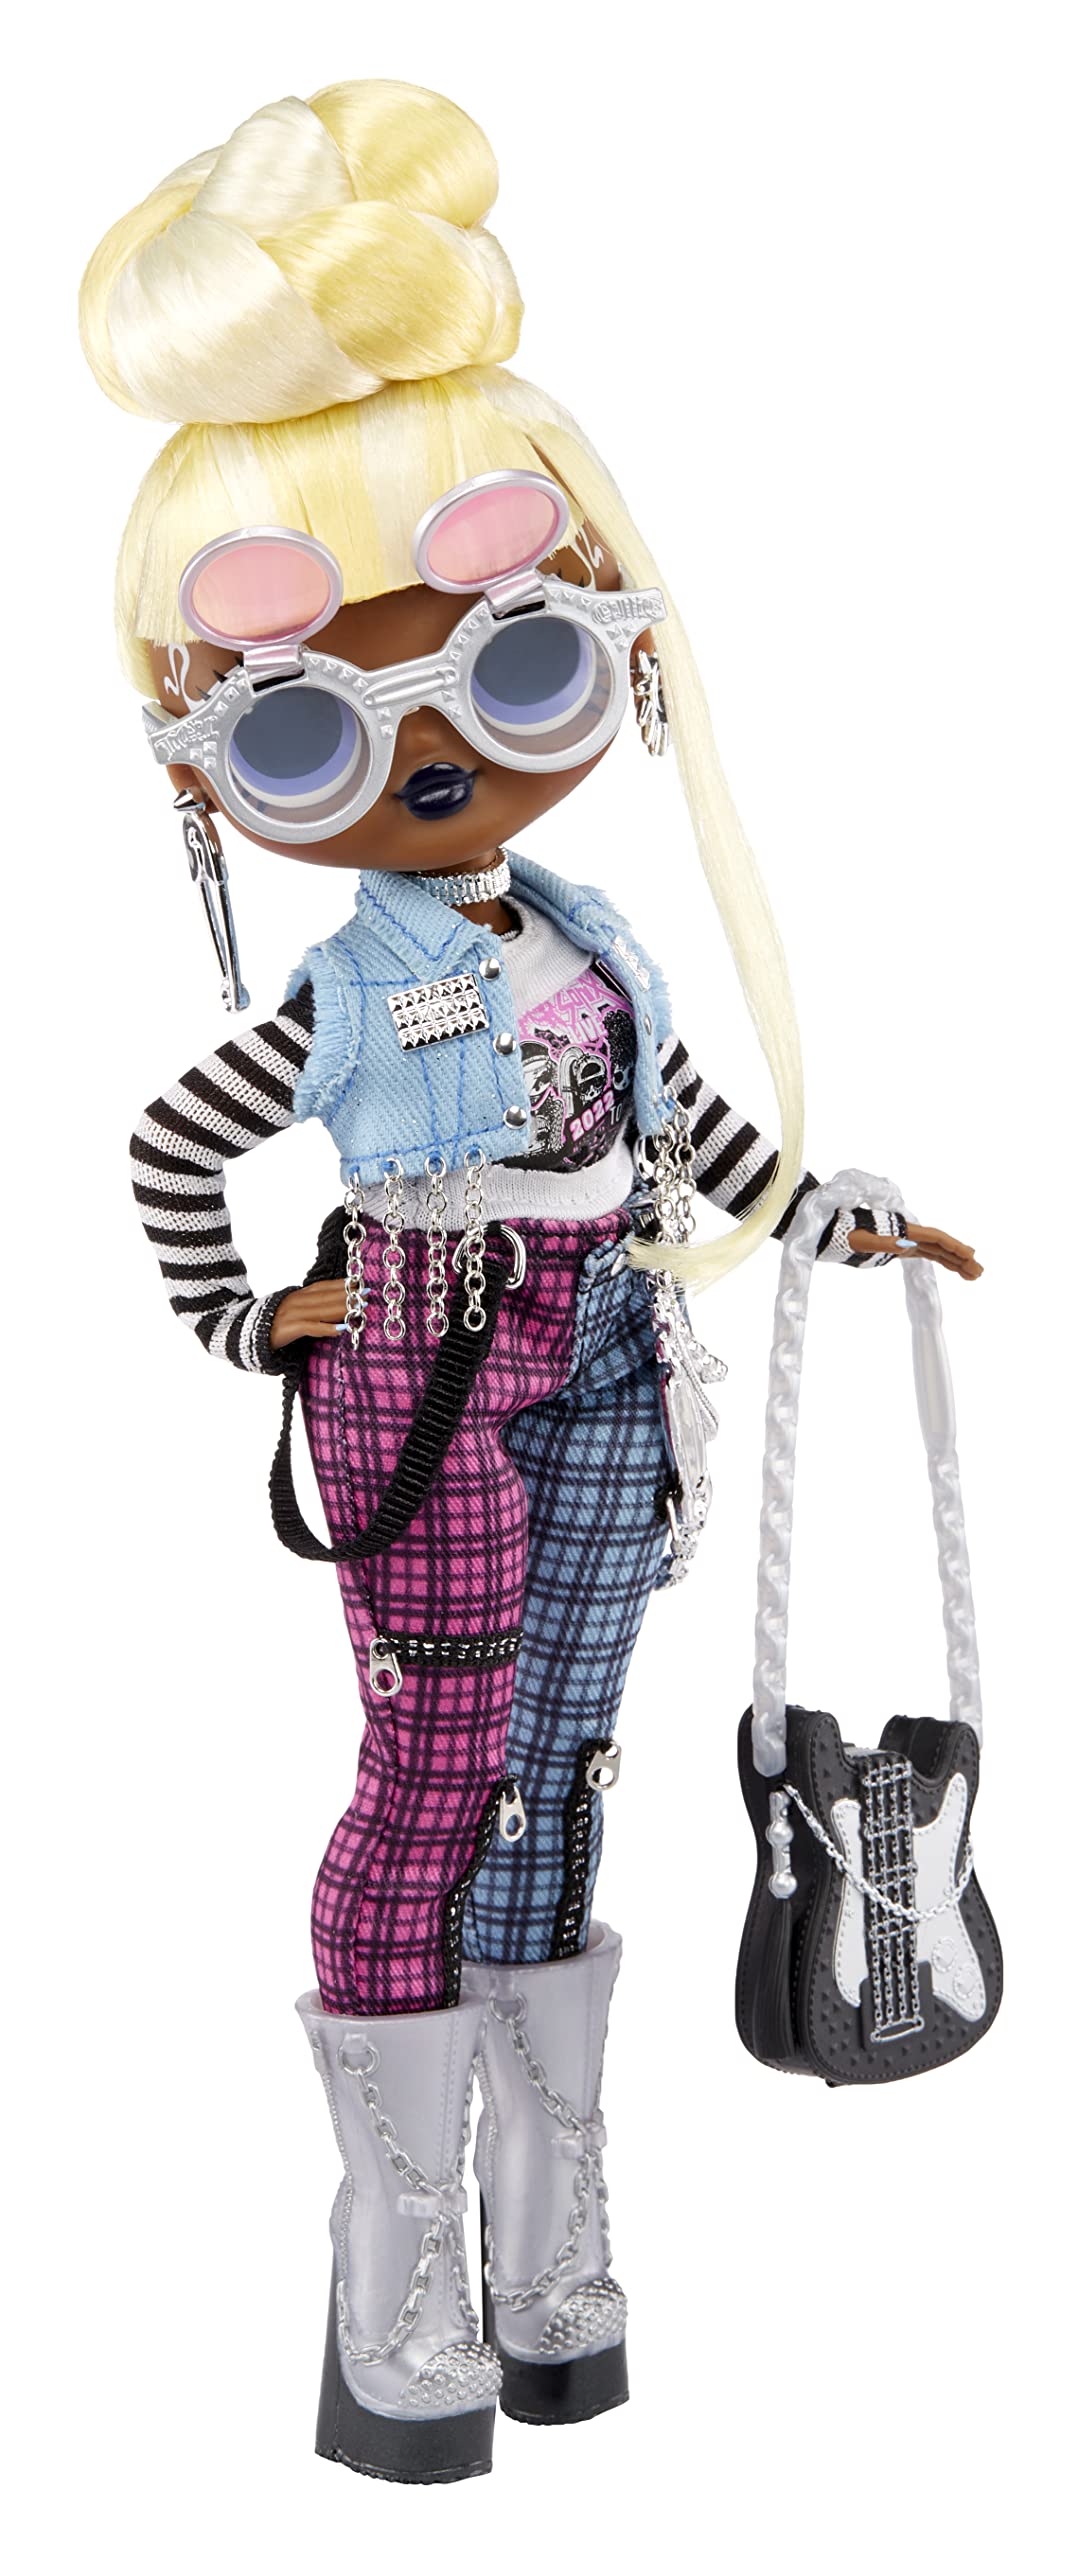 L.O.L. Surprise! OMG Melrose Fashion Doll with 20 Surprises Including Accessories in Stylish Outfit, Holiday Toy Great Gift for Kids Girls Boys Ages 4 5 6+ Years Old & Collectors